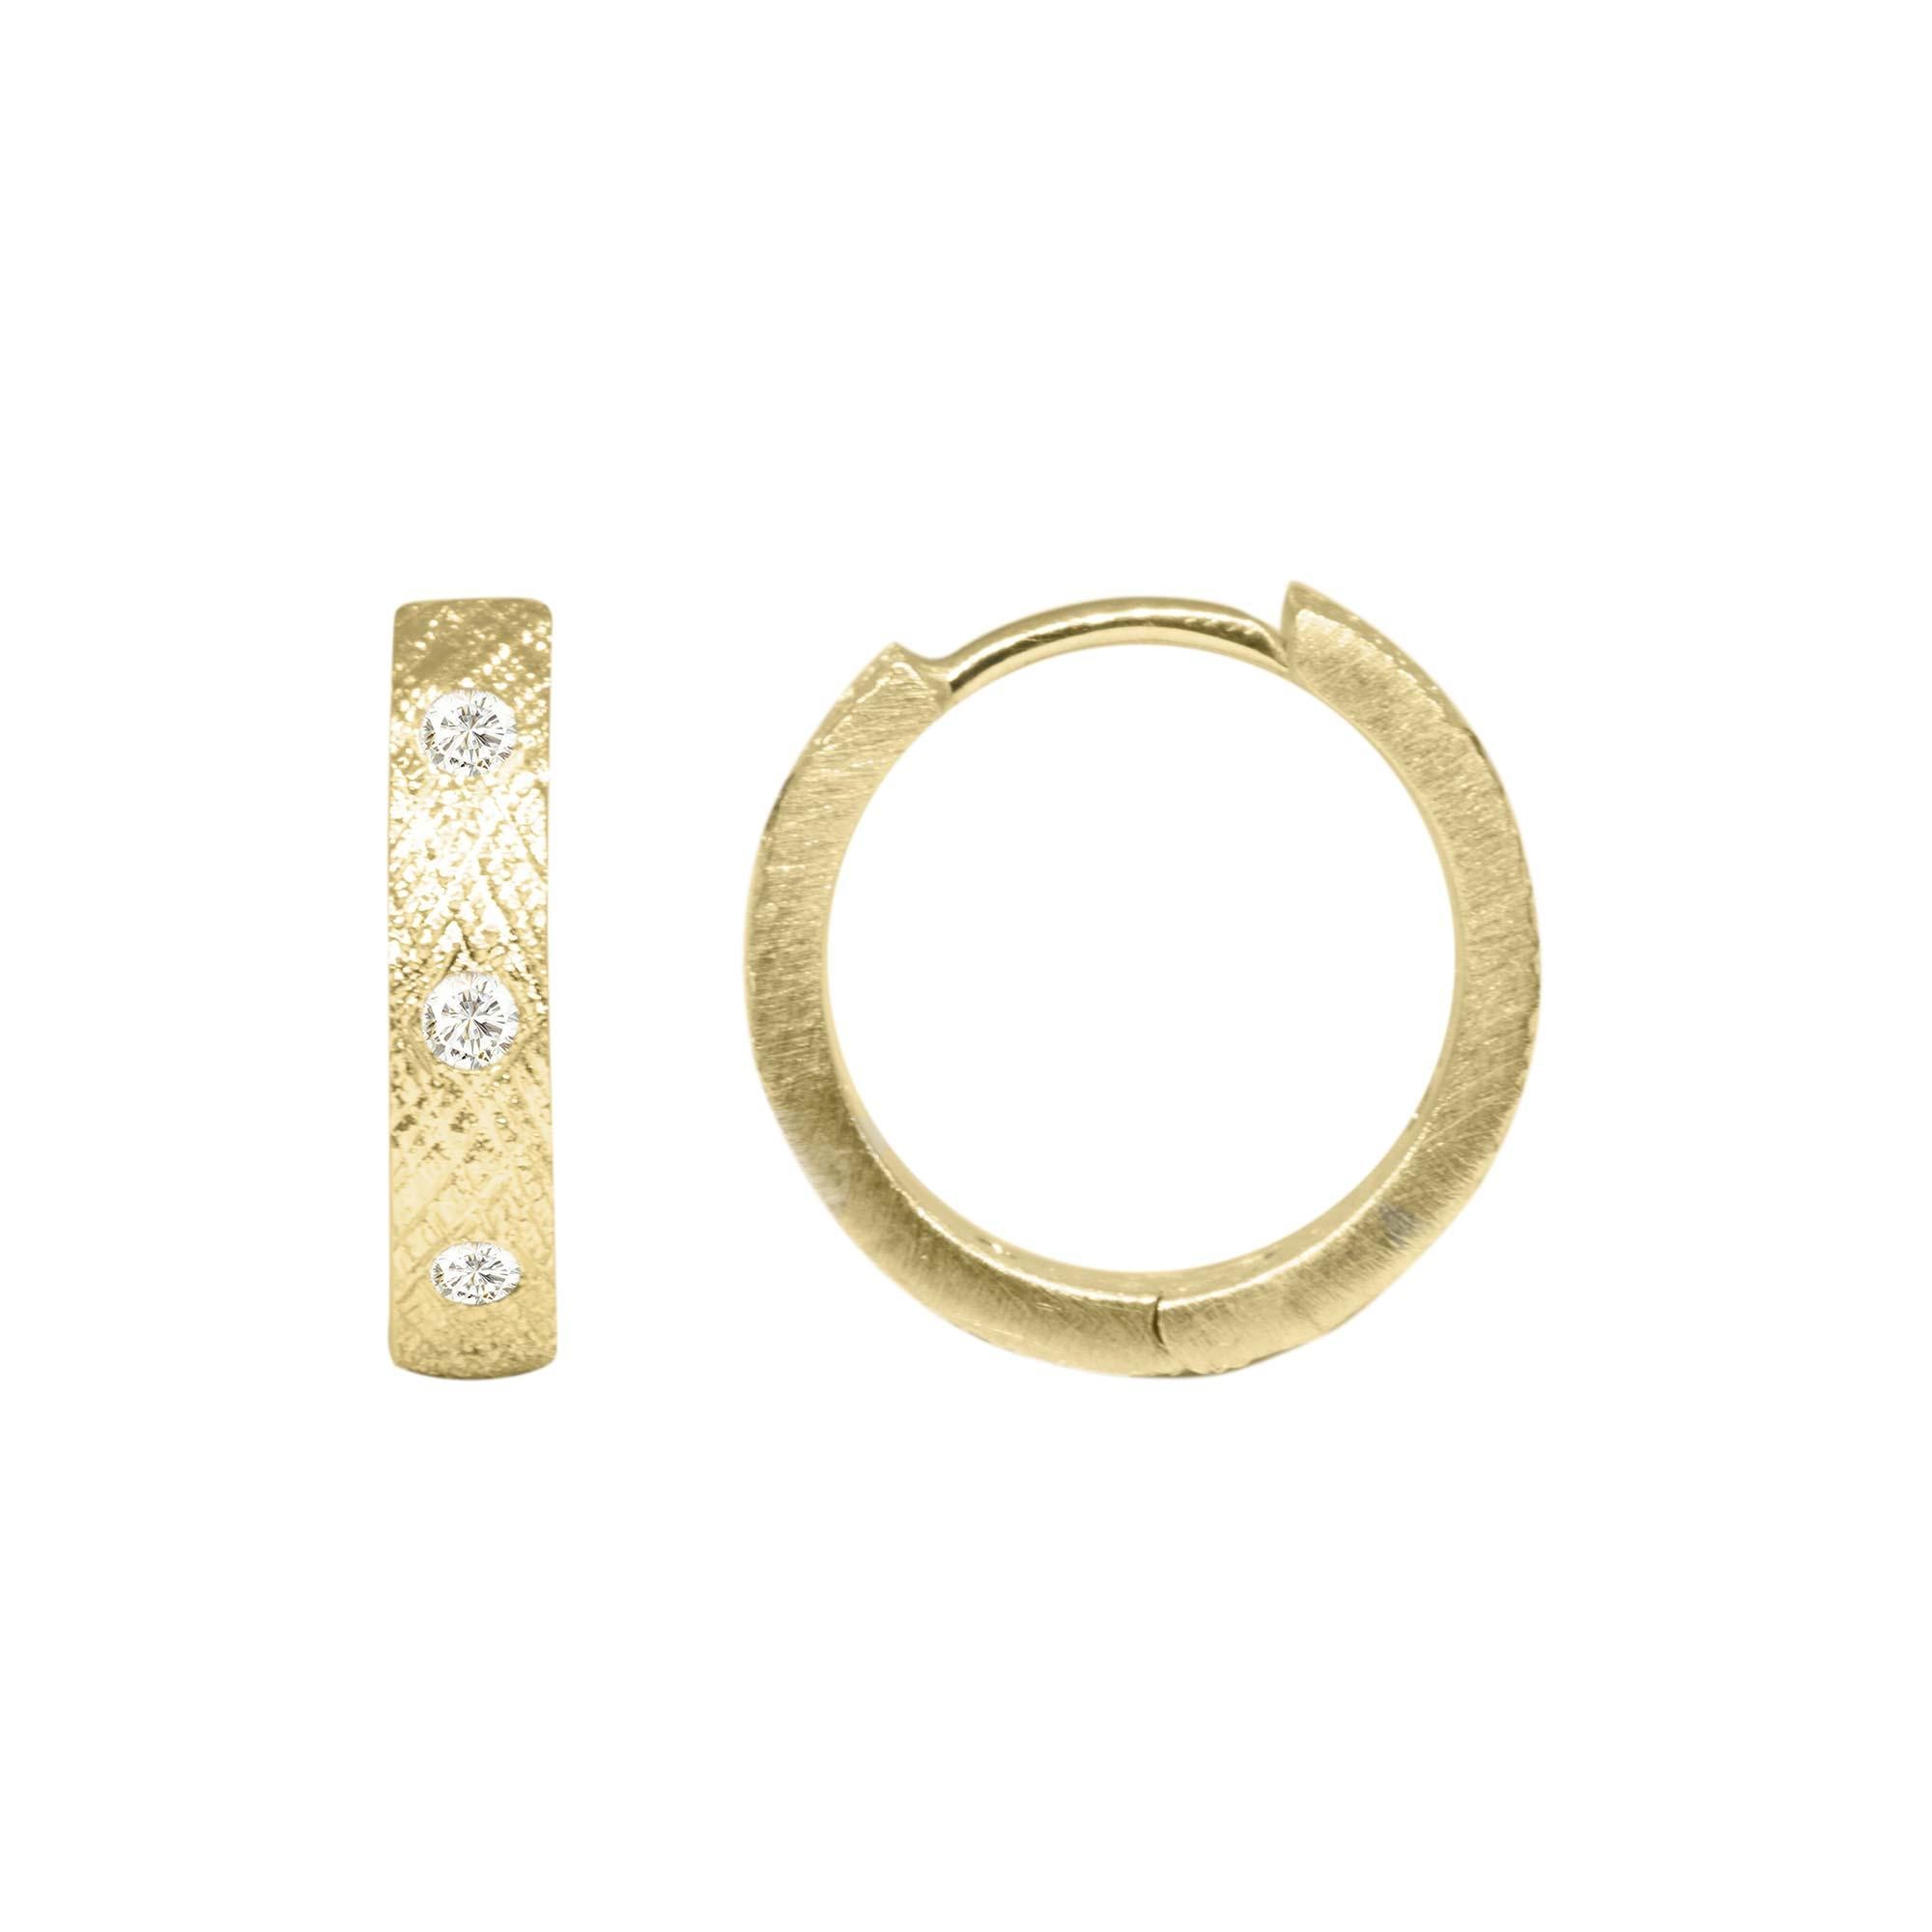 Defined by a hand-hammered crosshatch pattern with gorgeous shimmer and texture, the Florentine 15mm Gold Hoops feel extra luxe with sparkling diamonds.
Earwires are made in 18k gold for hypoallergenic.

Details
Metal: 18K Yellow Gold
Diamond carat: